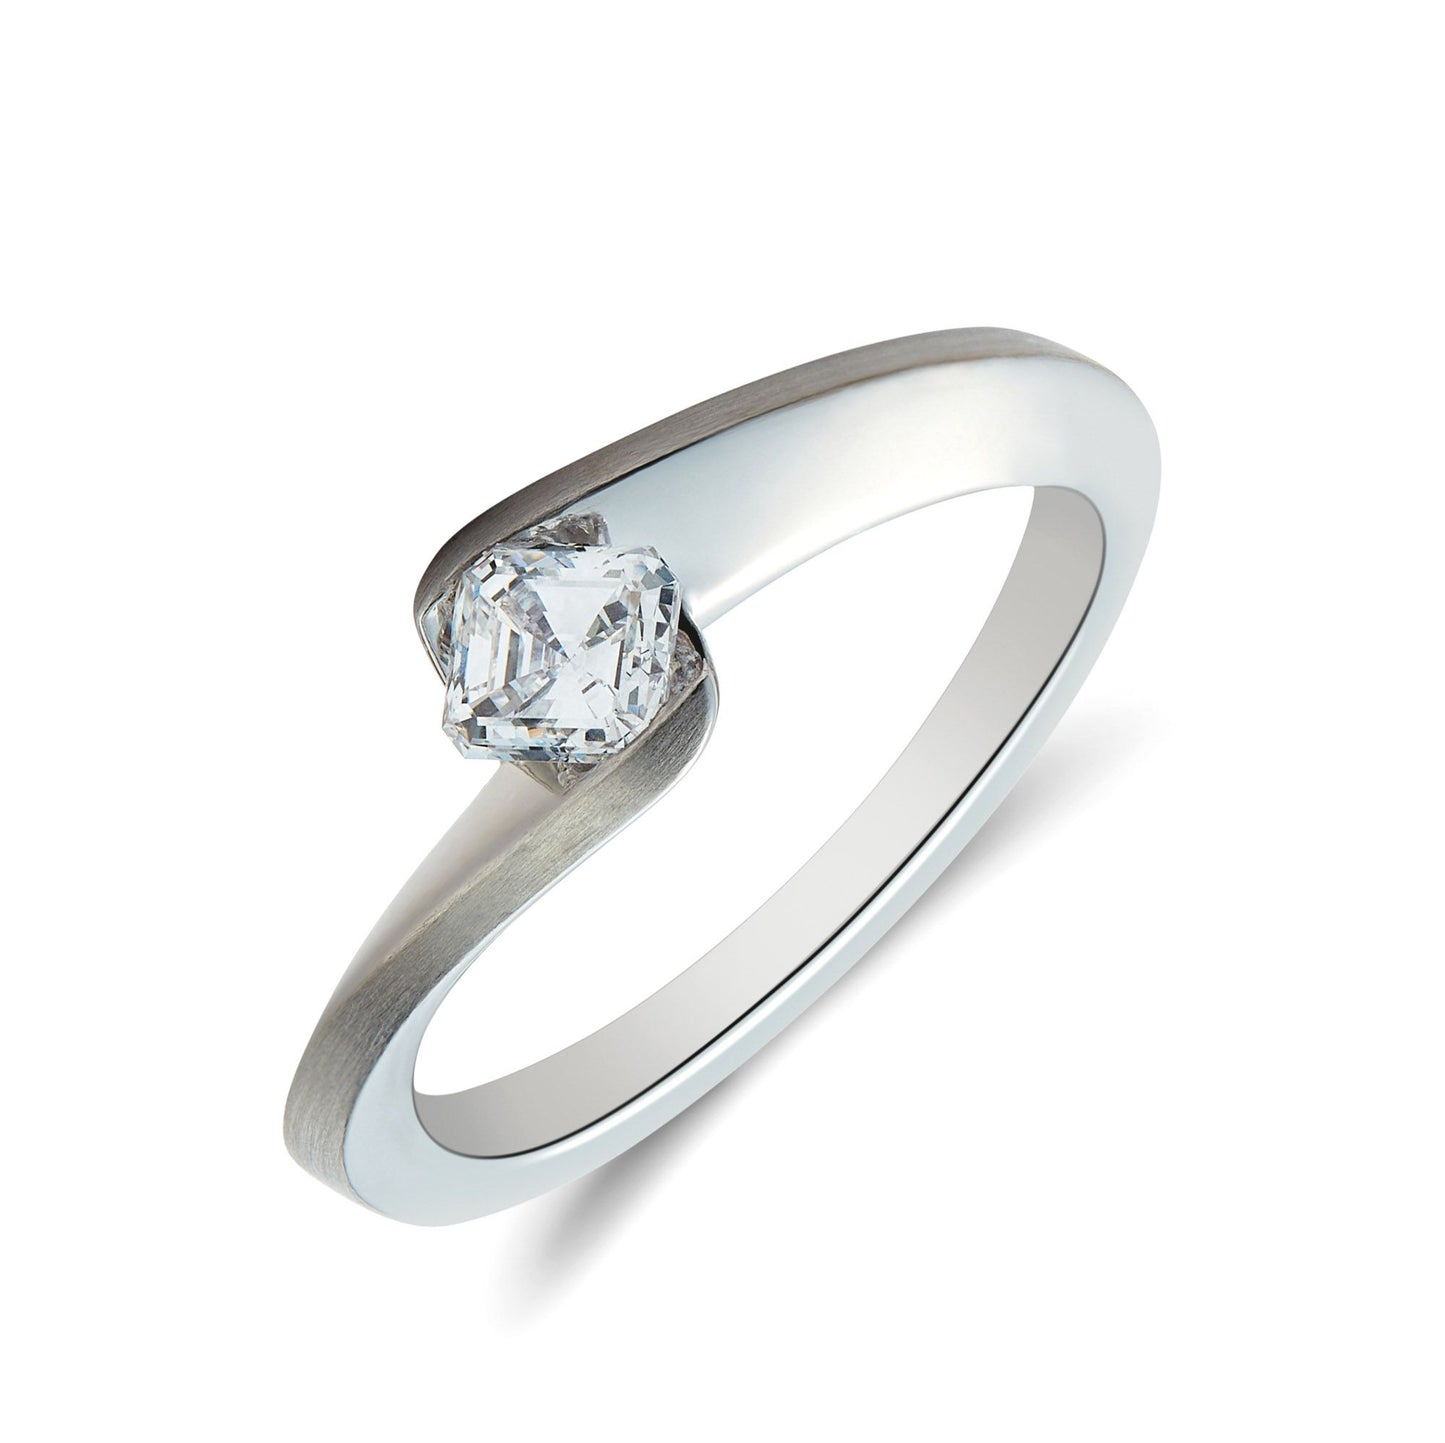 18ct white gold Ascher cut diamond crossover solitaire ring.